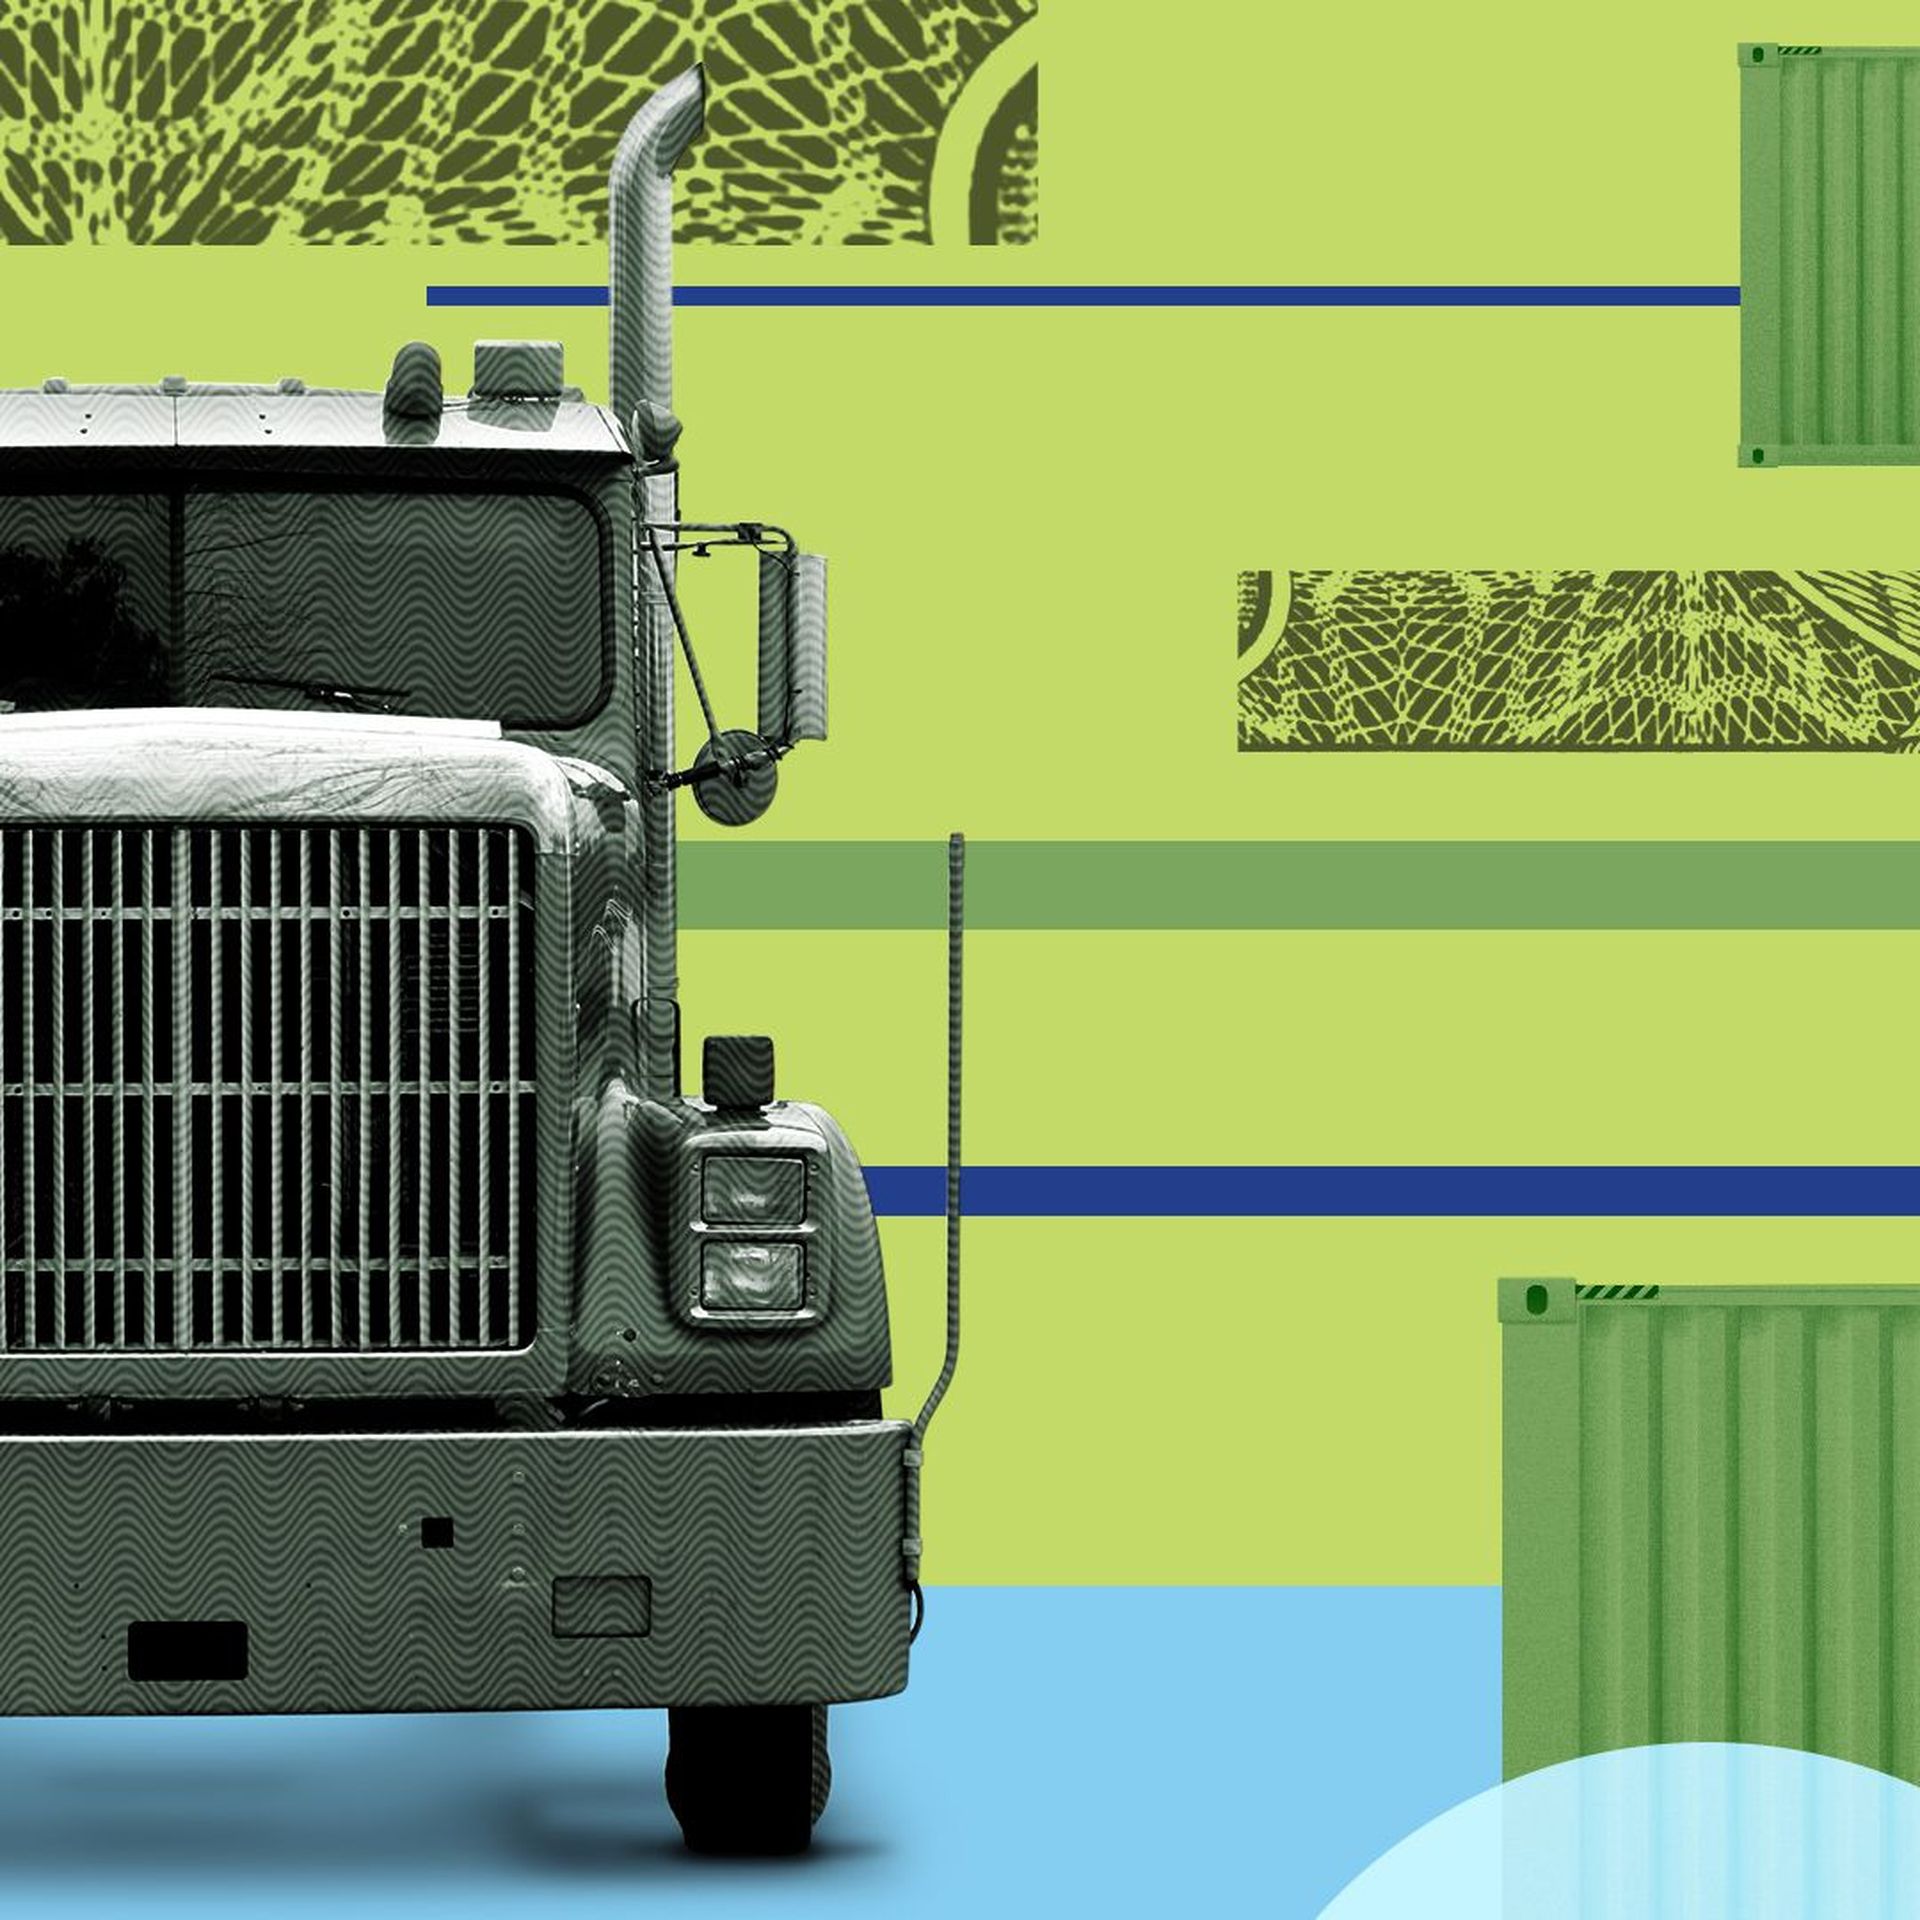 Illustration of a semitruck and shipping containers surrounded by abstract shapes and money elements.